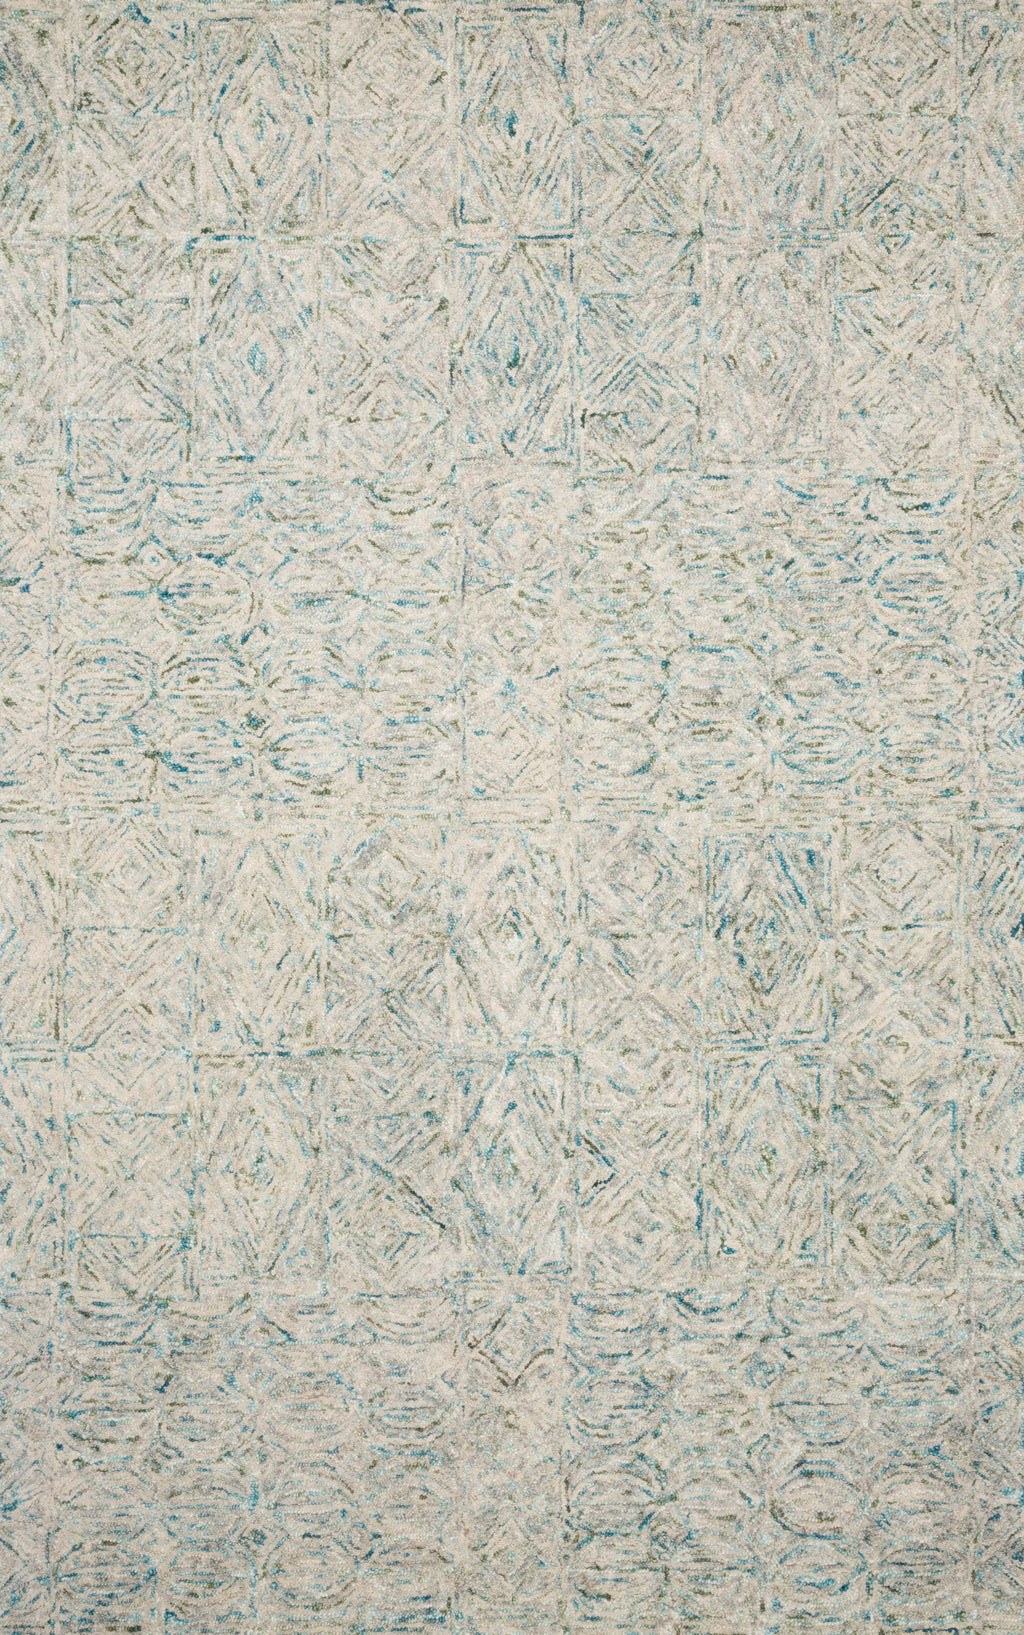 PEREGRINE Collection Wool Rug  in  AQUA Blue Runner Hand-Tufted Wool